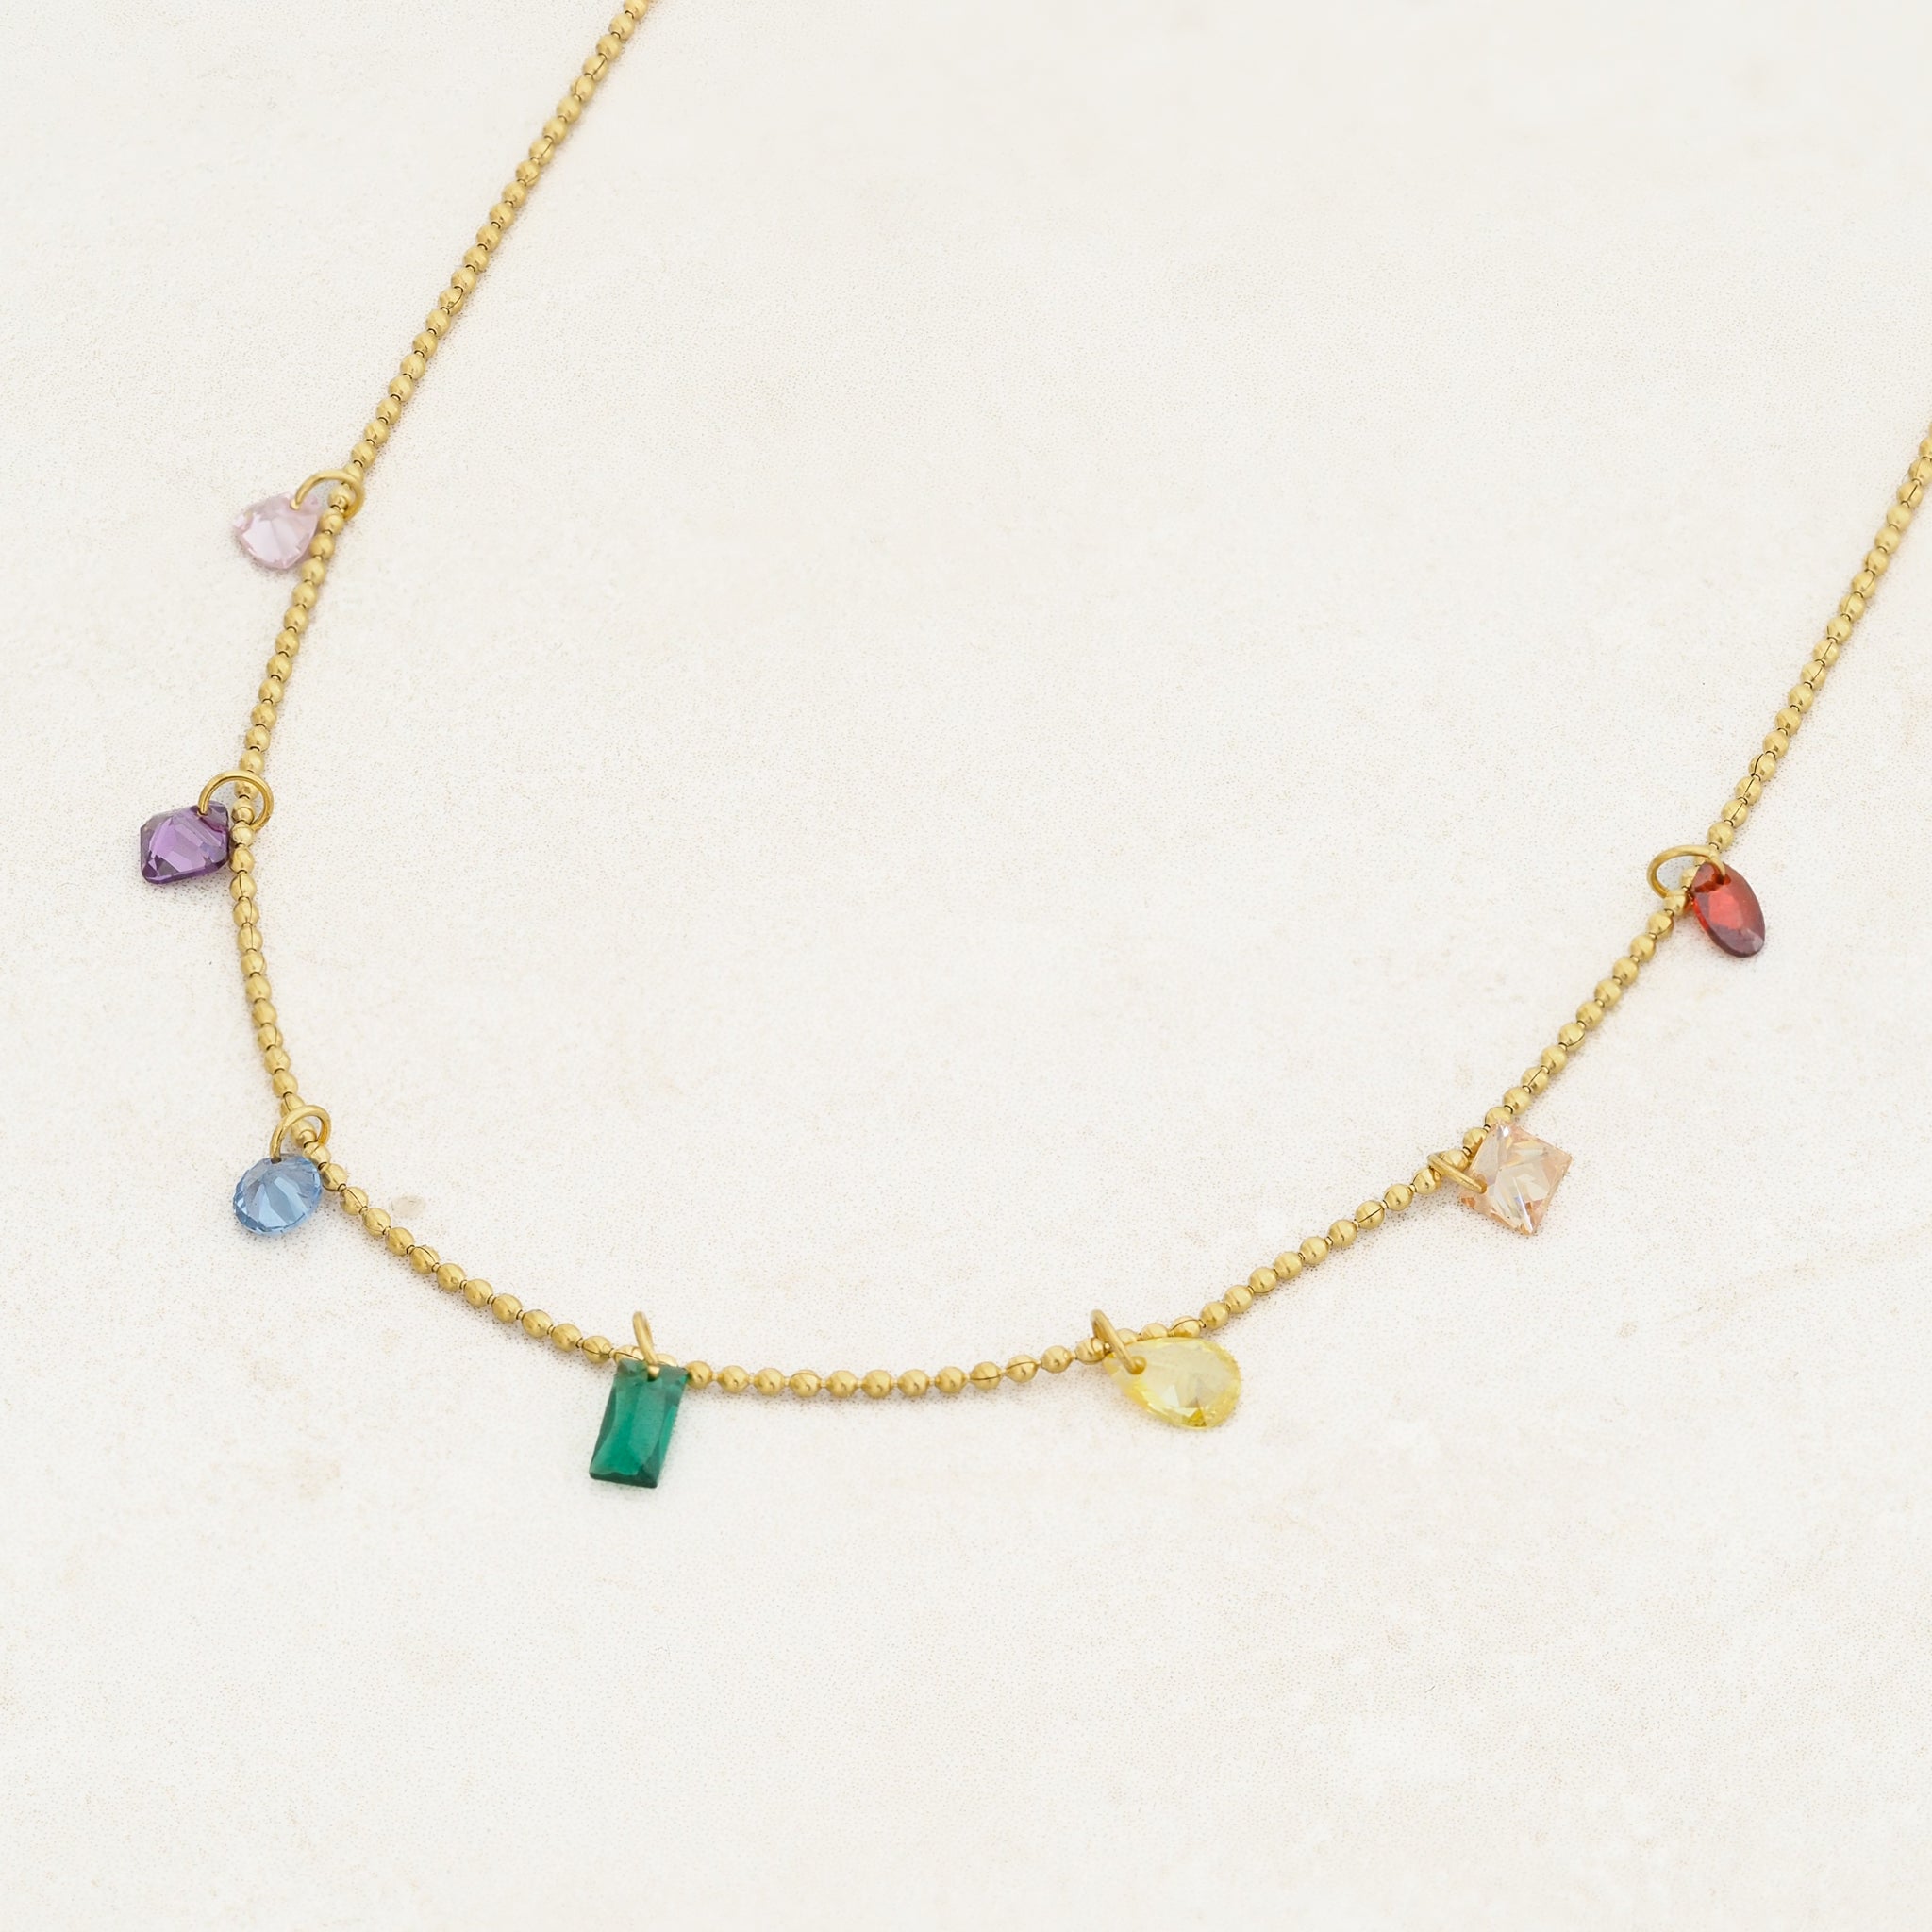 Rainbow pride necklace featuring droplets with colours from the rainbow pride flag, close